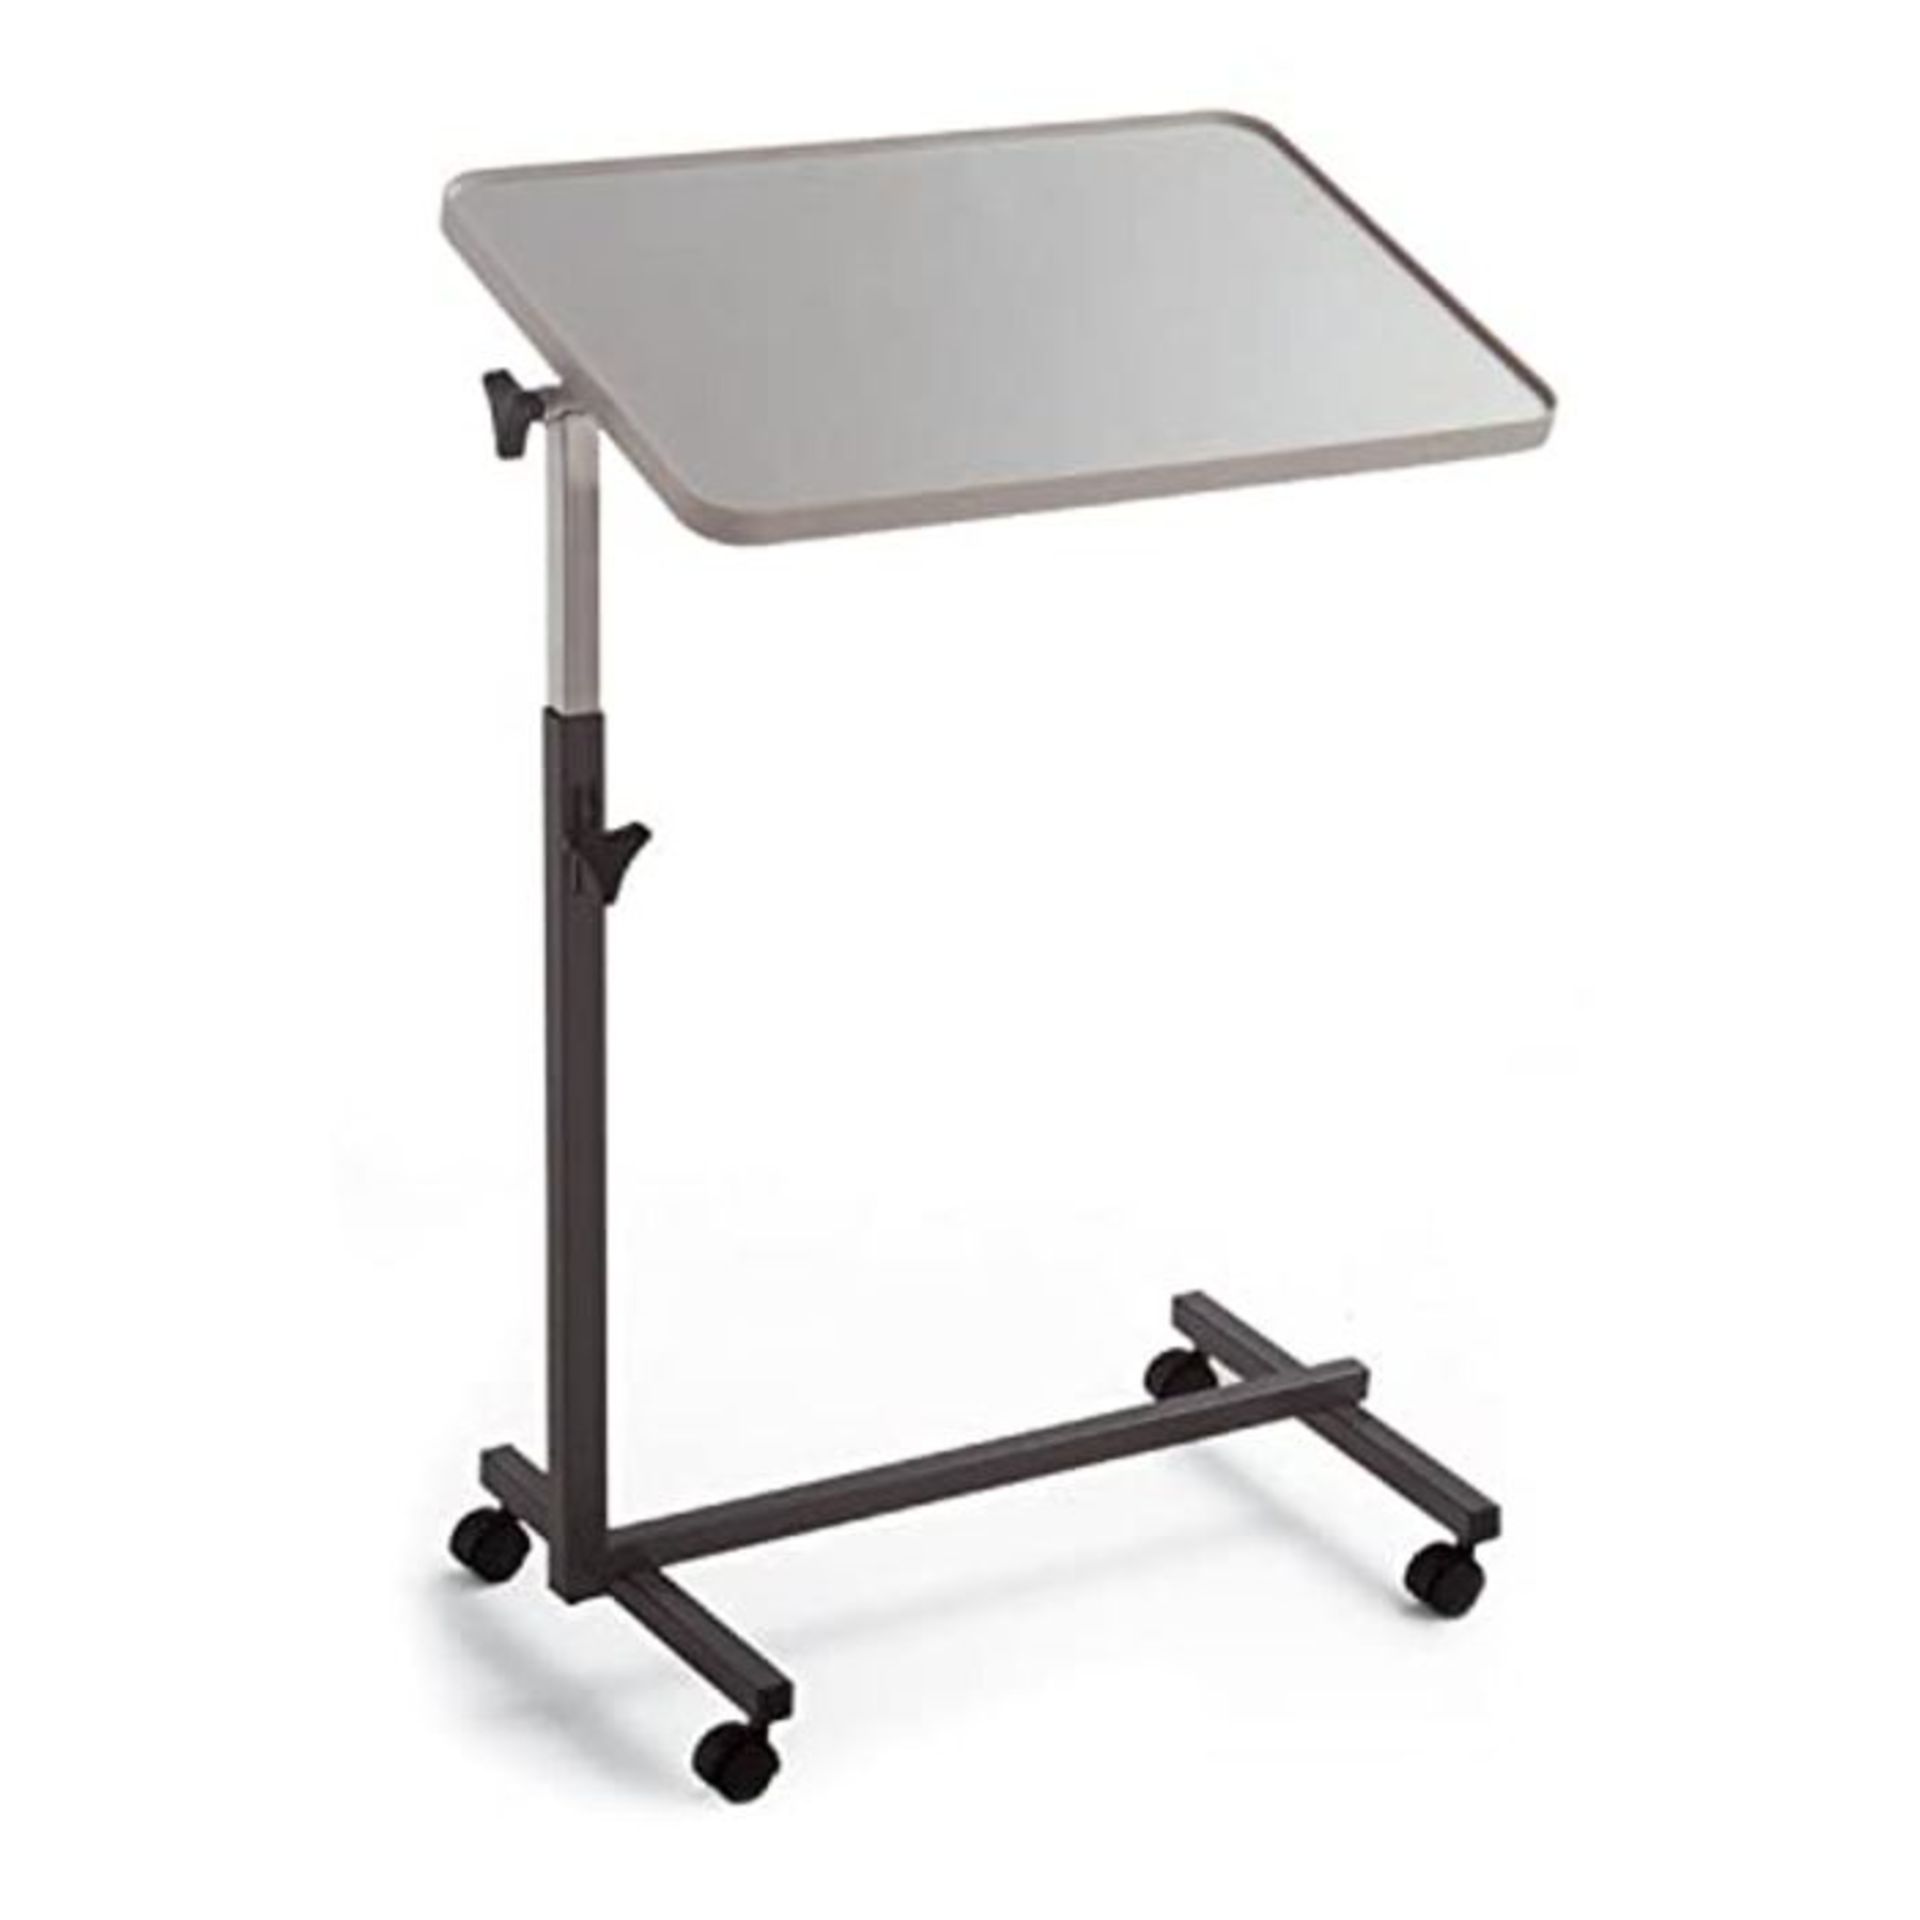 RRP £51.00 Invacare - Bed Table - Over Bed Table for Elderly - Adjustable Height Bed Table with W